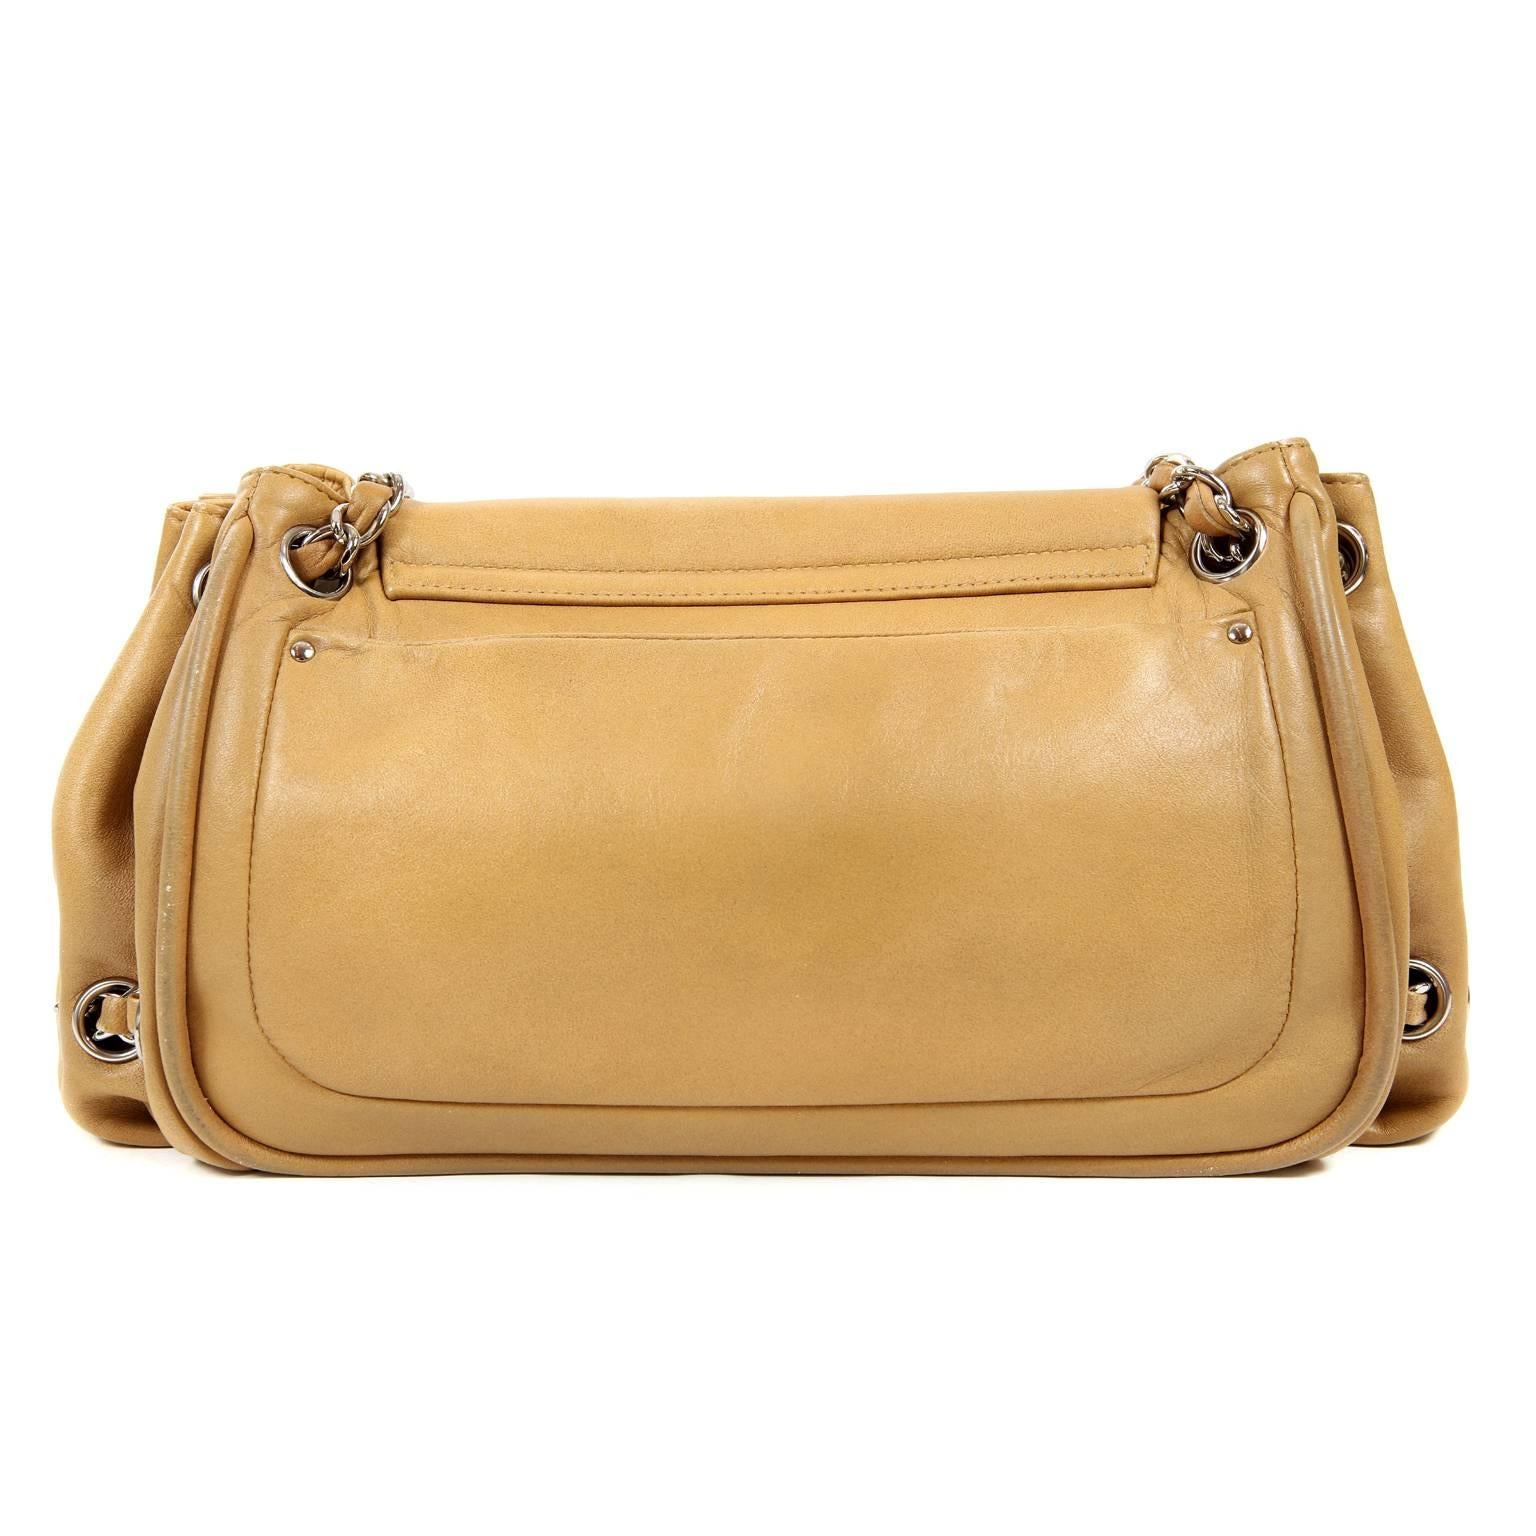 This authentic Chanel Beige Leather Accordion Flap Bag is in excellent plus condition.  The expandable style is perfect for every day in a warm neutral that complements any other color.  
Honey beige leather flap bag has tonal interlocking CC